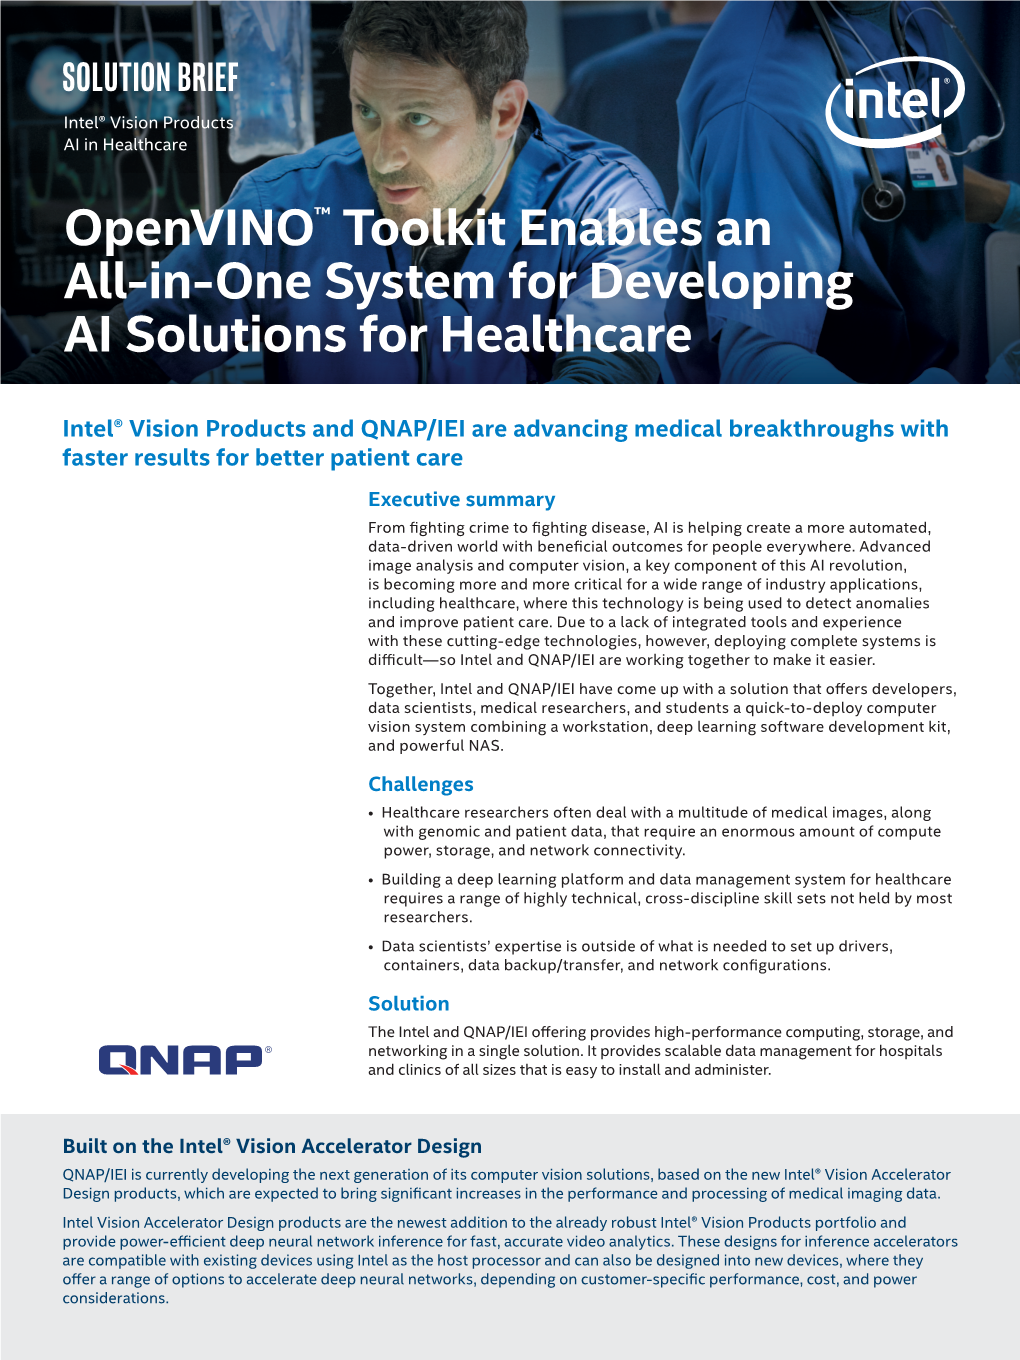 Openvino™ Toolkit Enables an All-In-One System for Developing AI Solutions for Healthcare